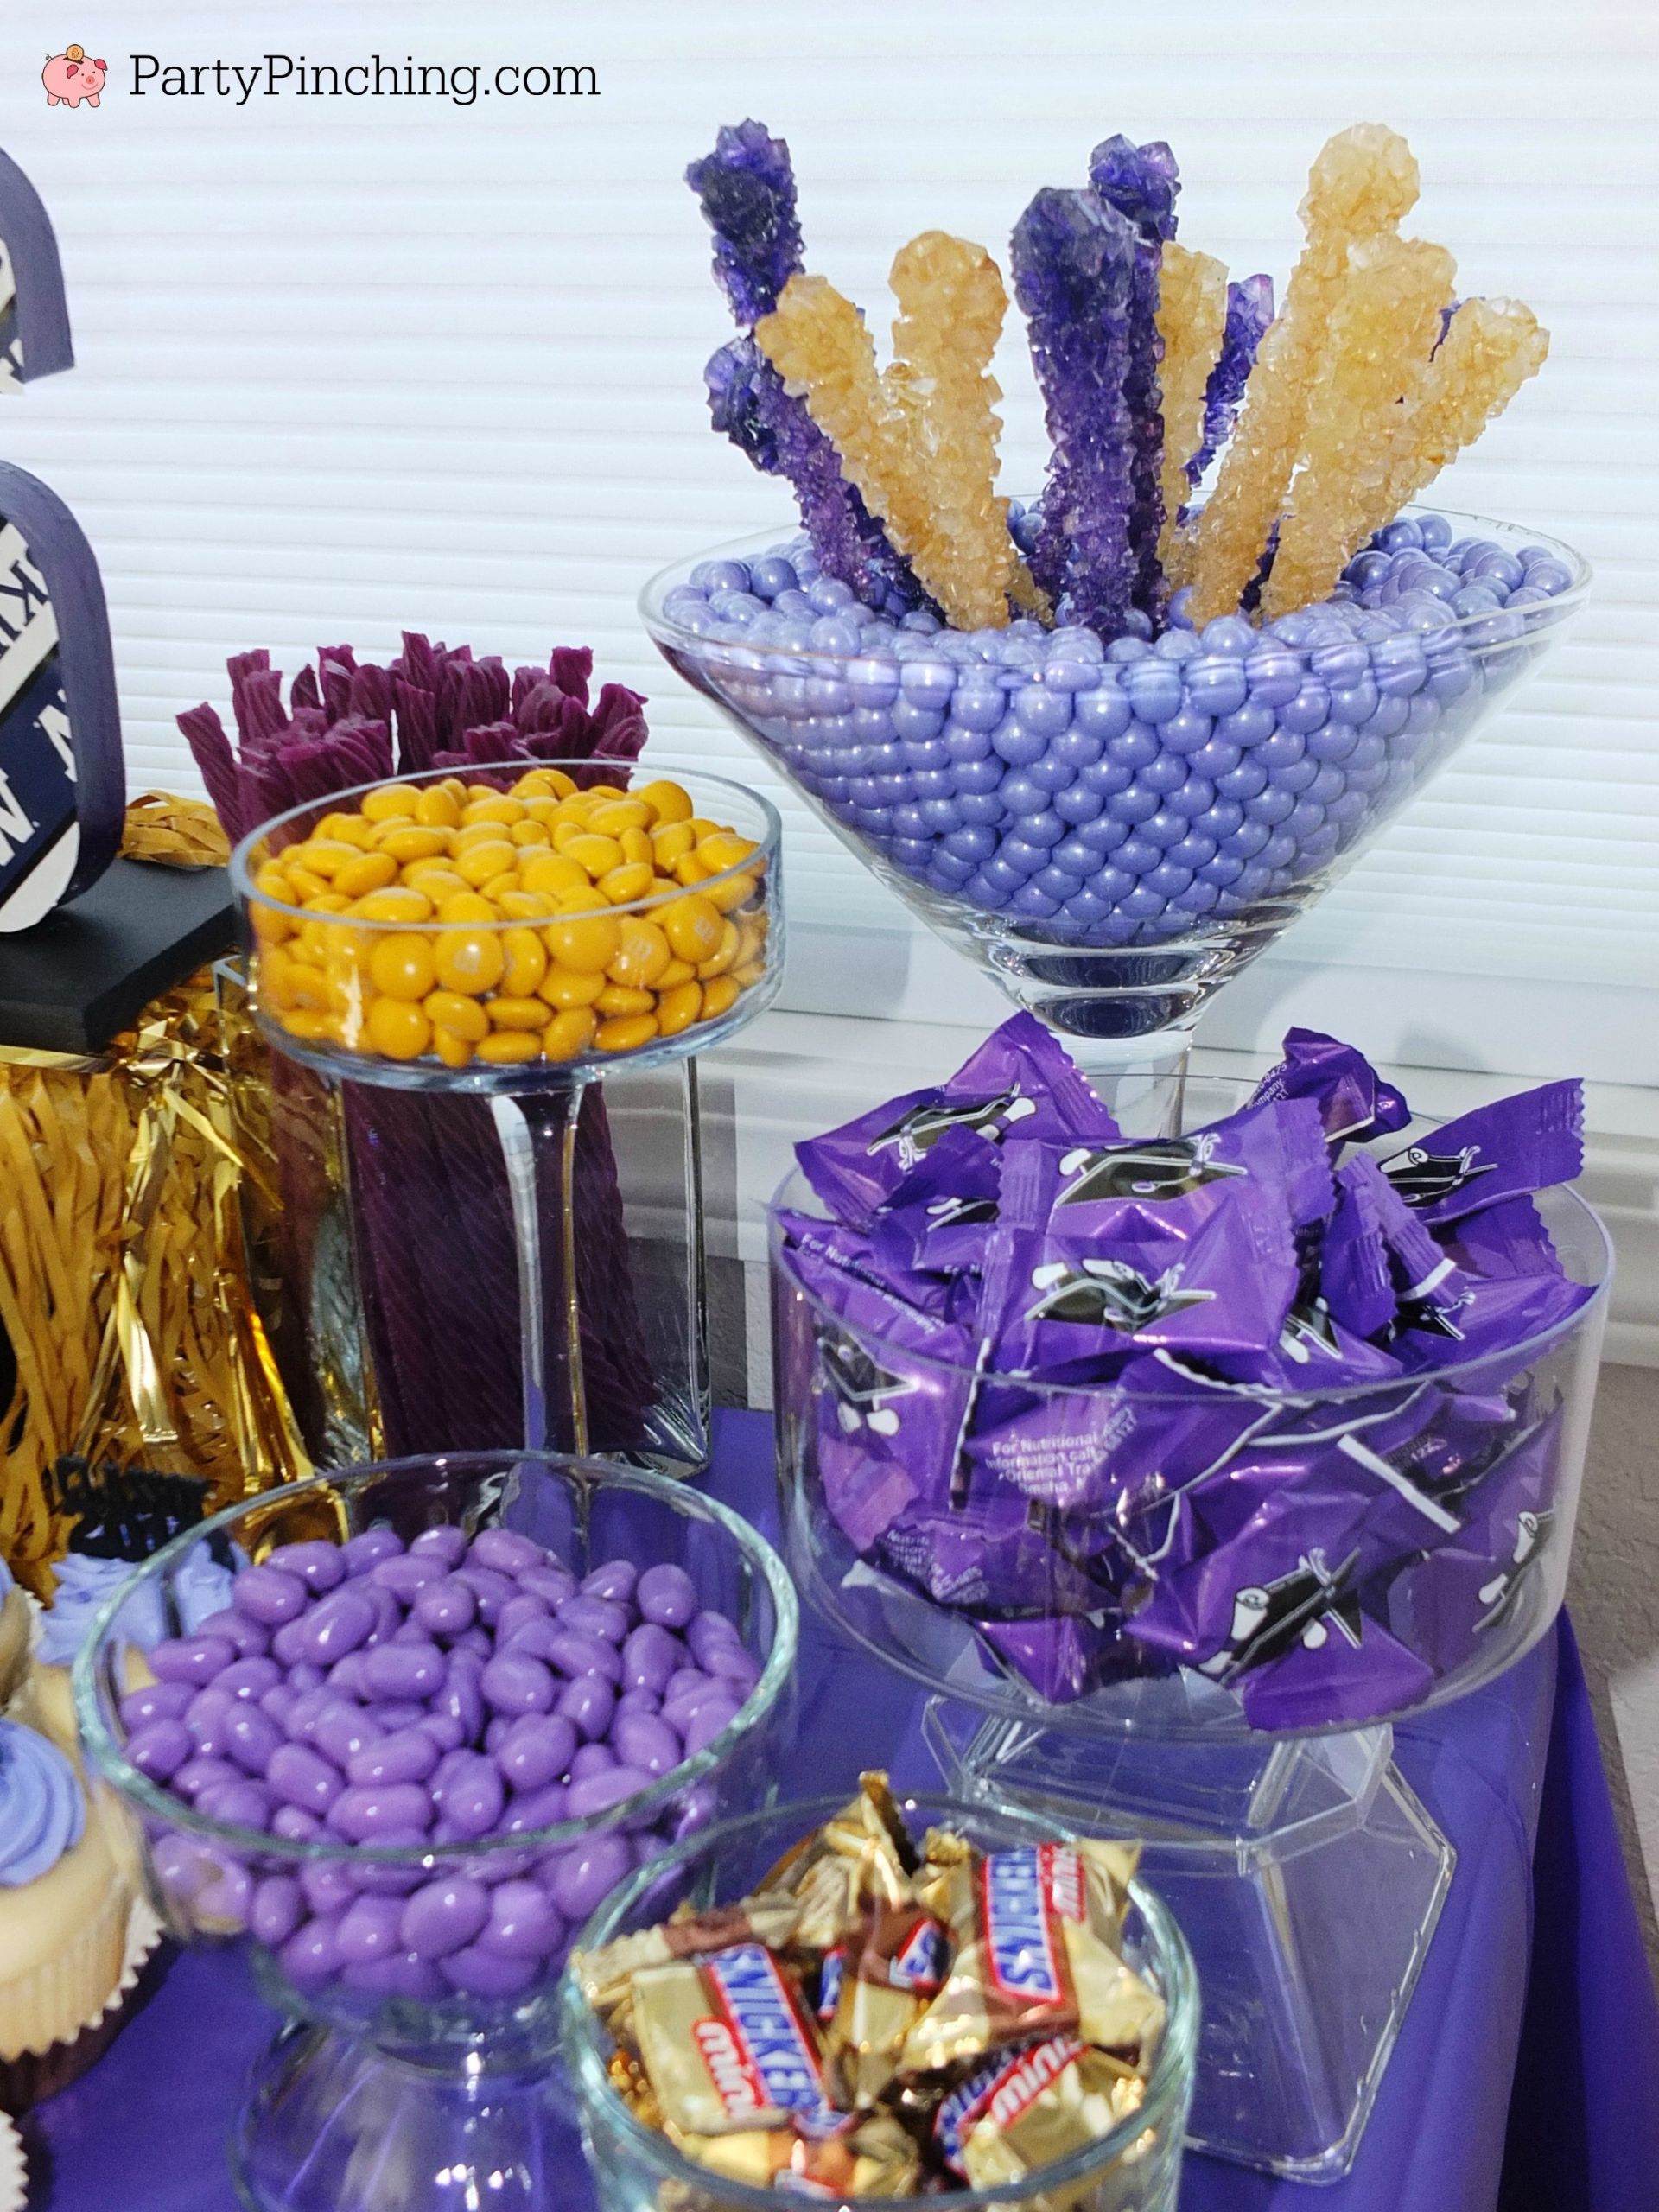 College Graduation Party Food Ideas
 College Graduation Party Graduation Party Ideas 2020